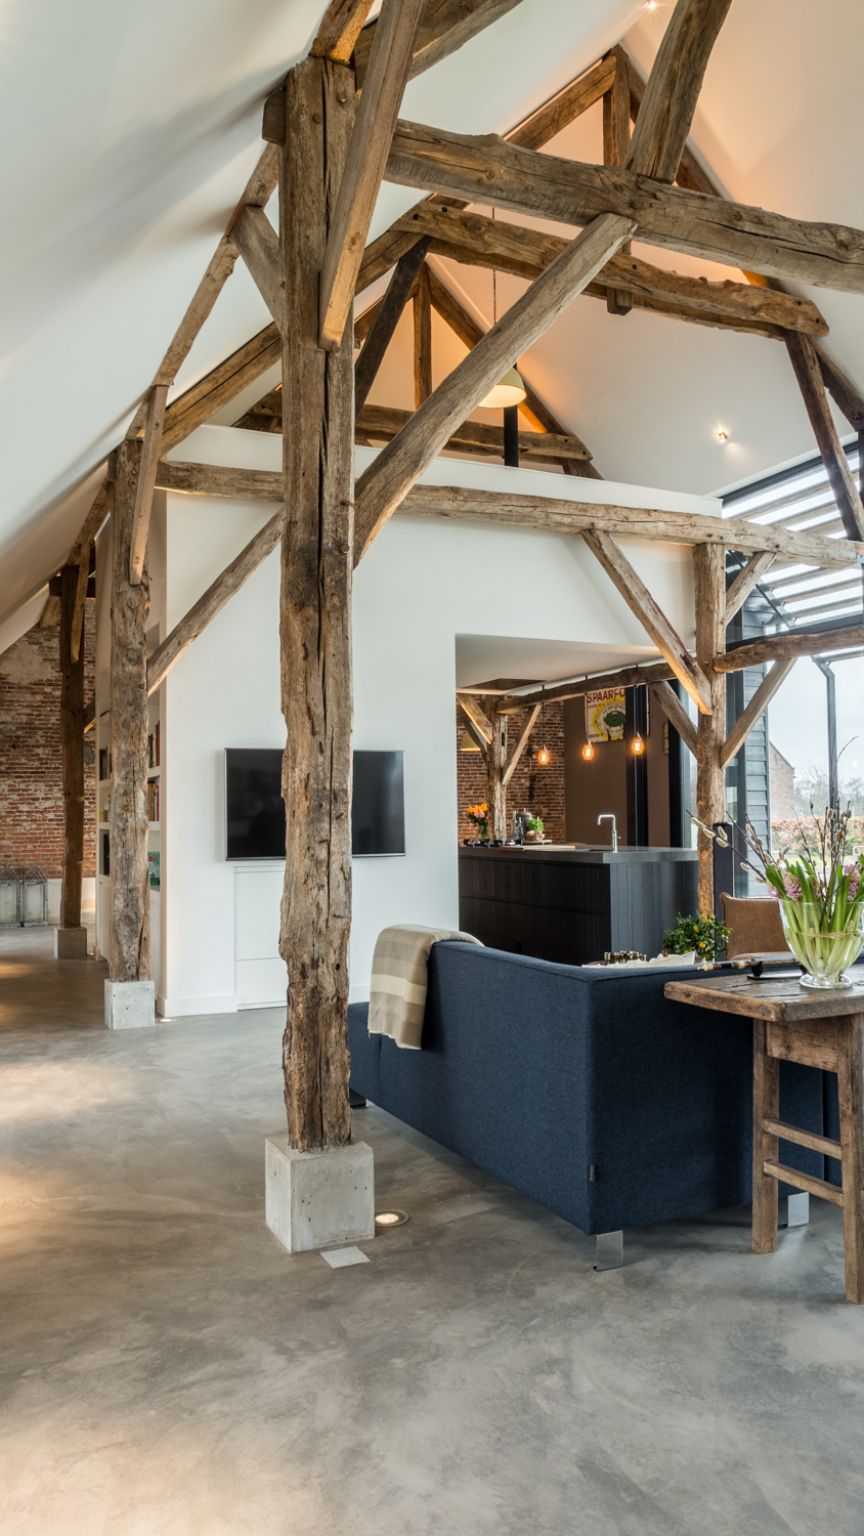 The high ceiling and exposed wooden beams are a wonderful combination which gives the living area lots of character